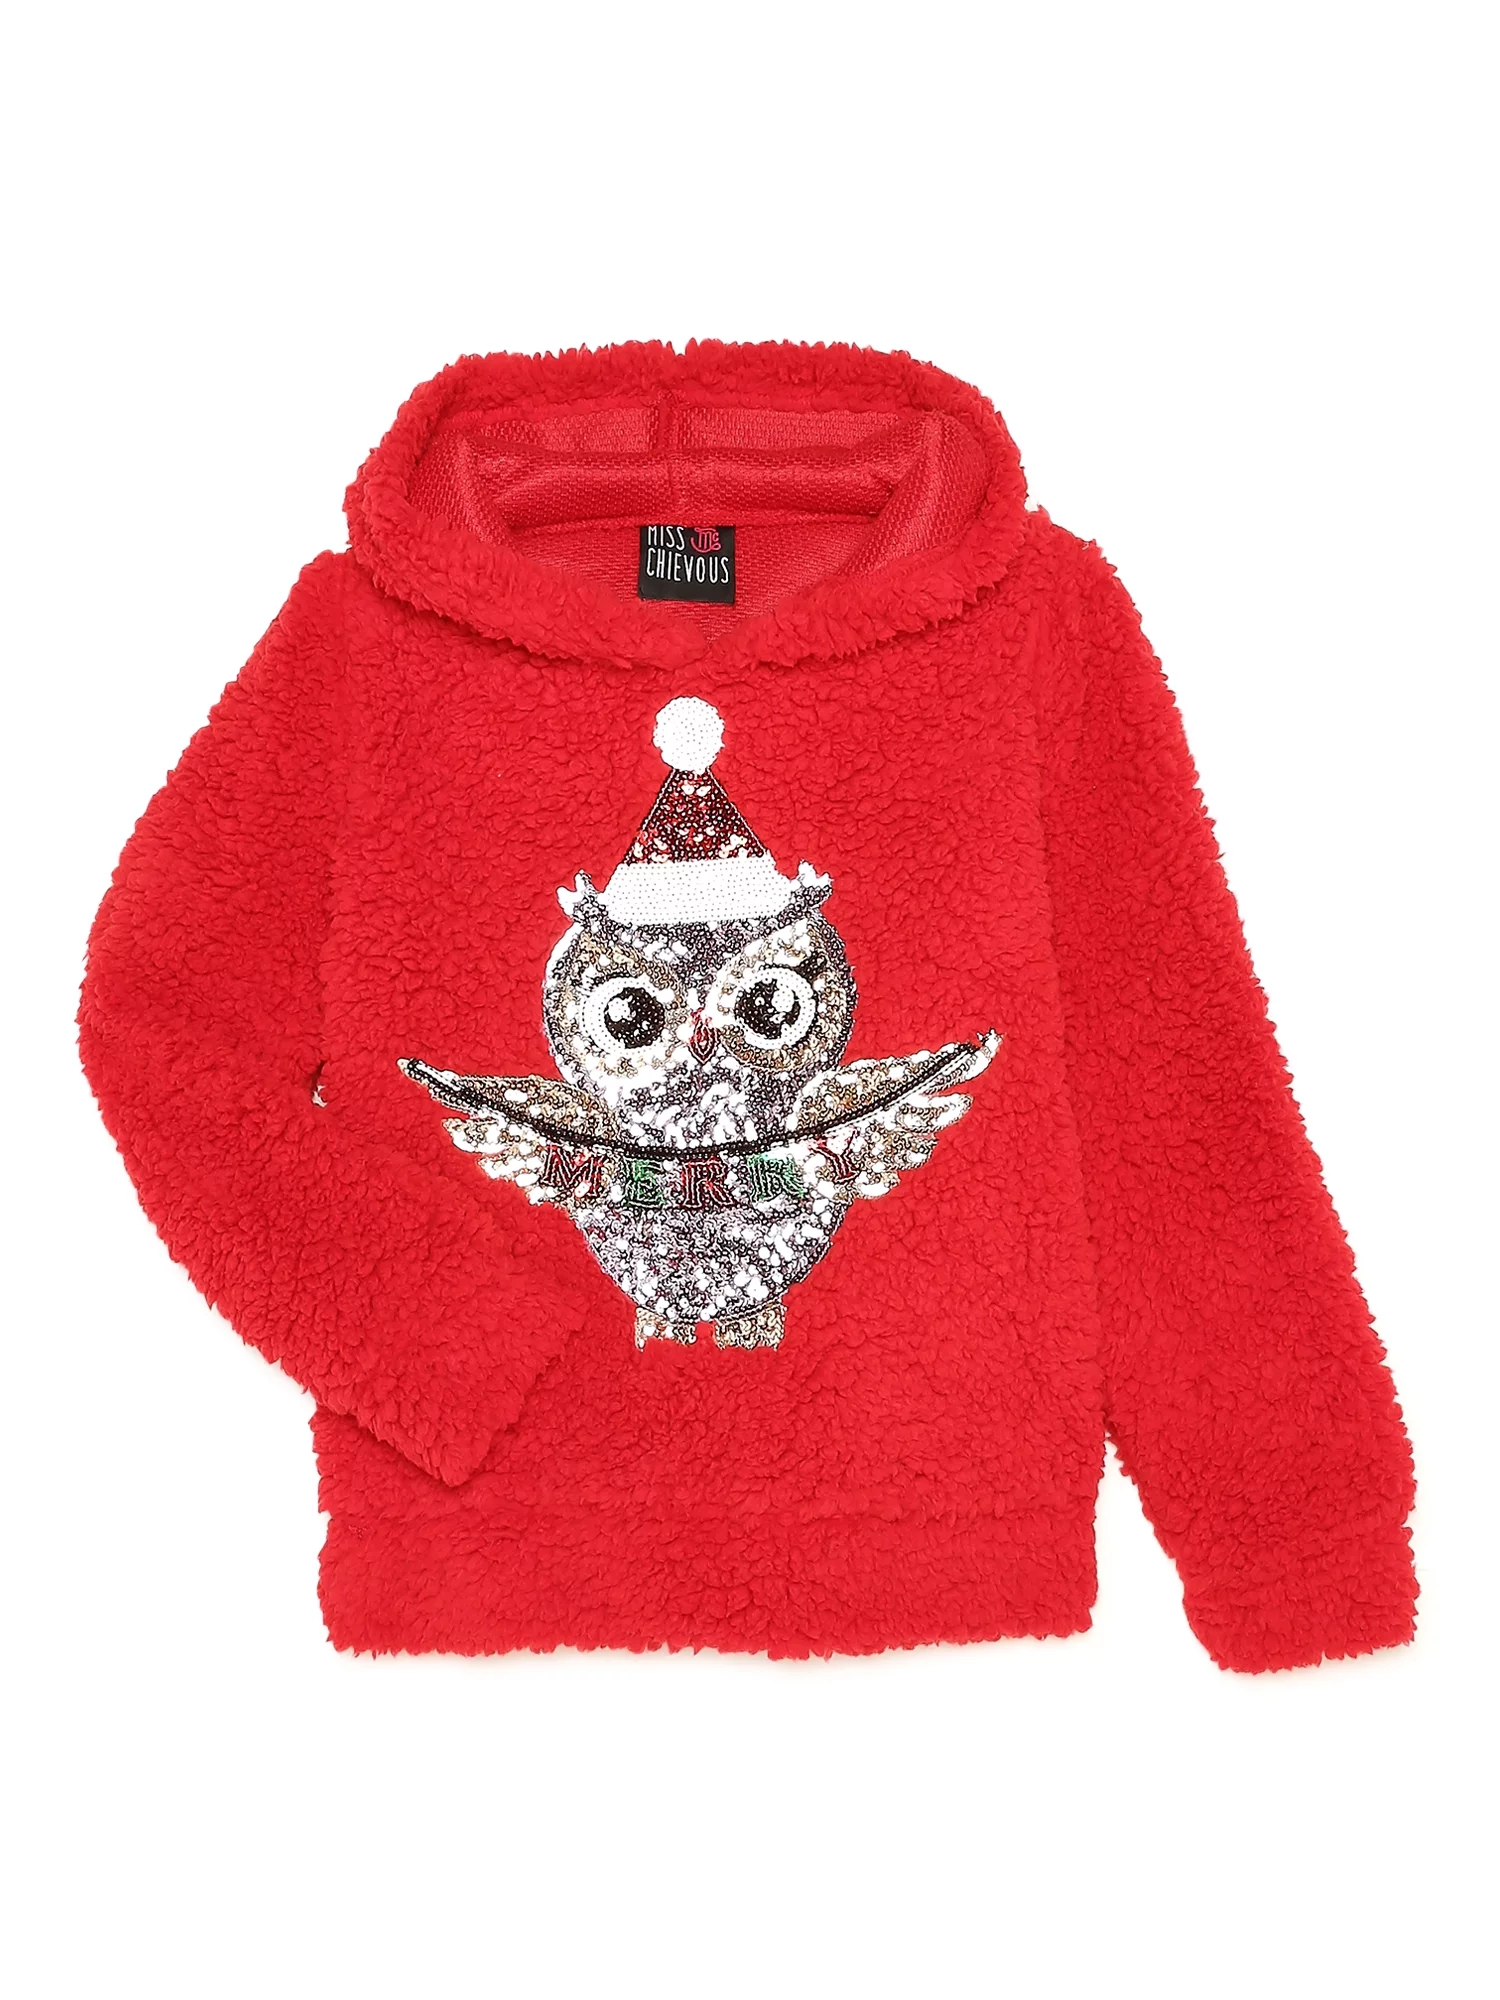 Miss Chievous Girls XMAS Sequin Critter Plush Faux Sherpa Pullover Hoodie